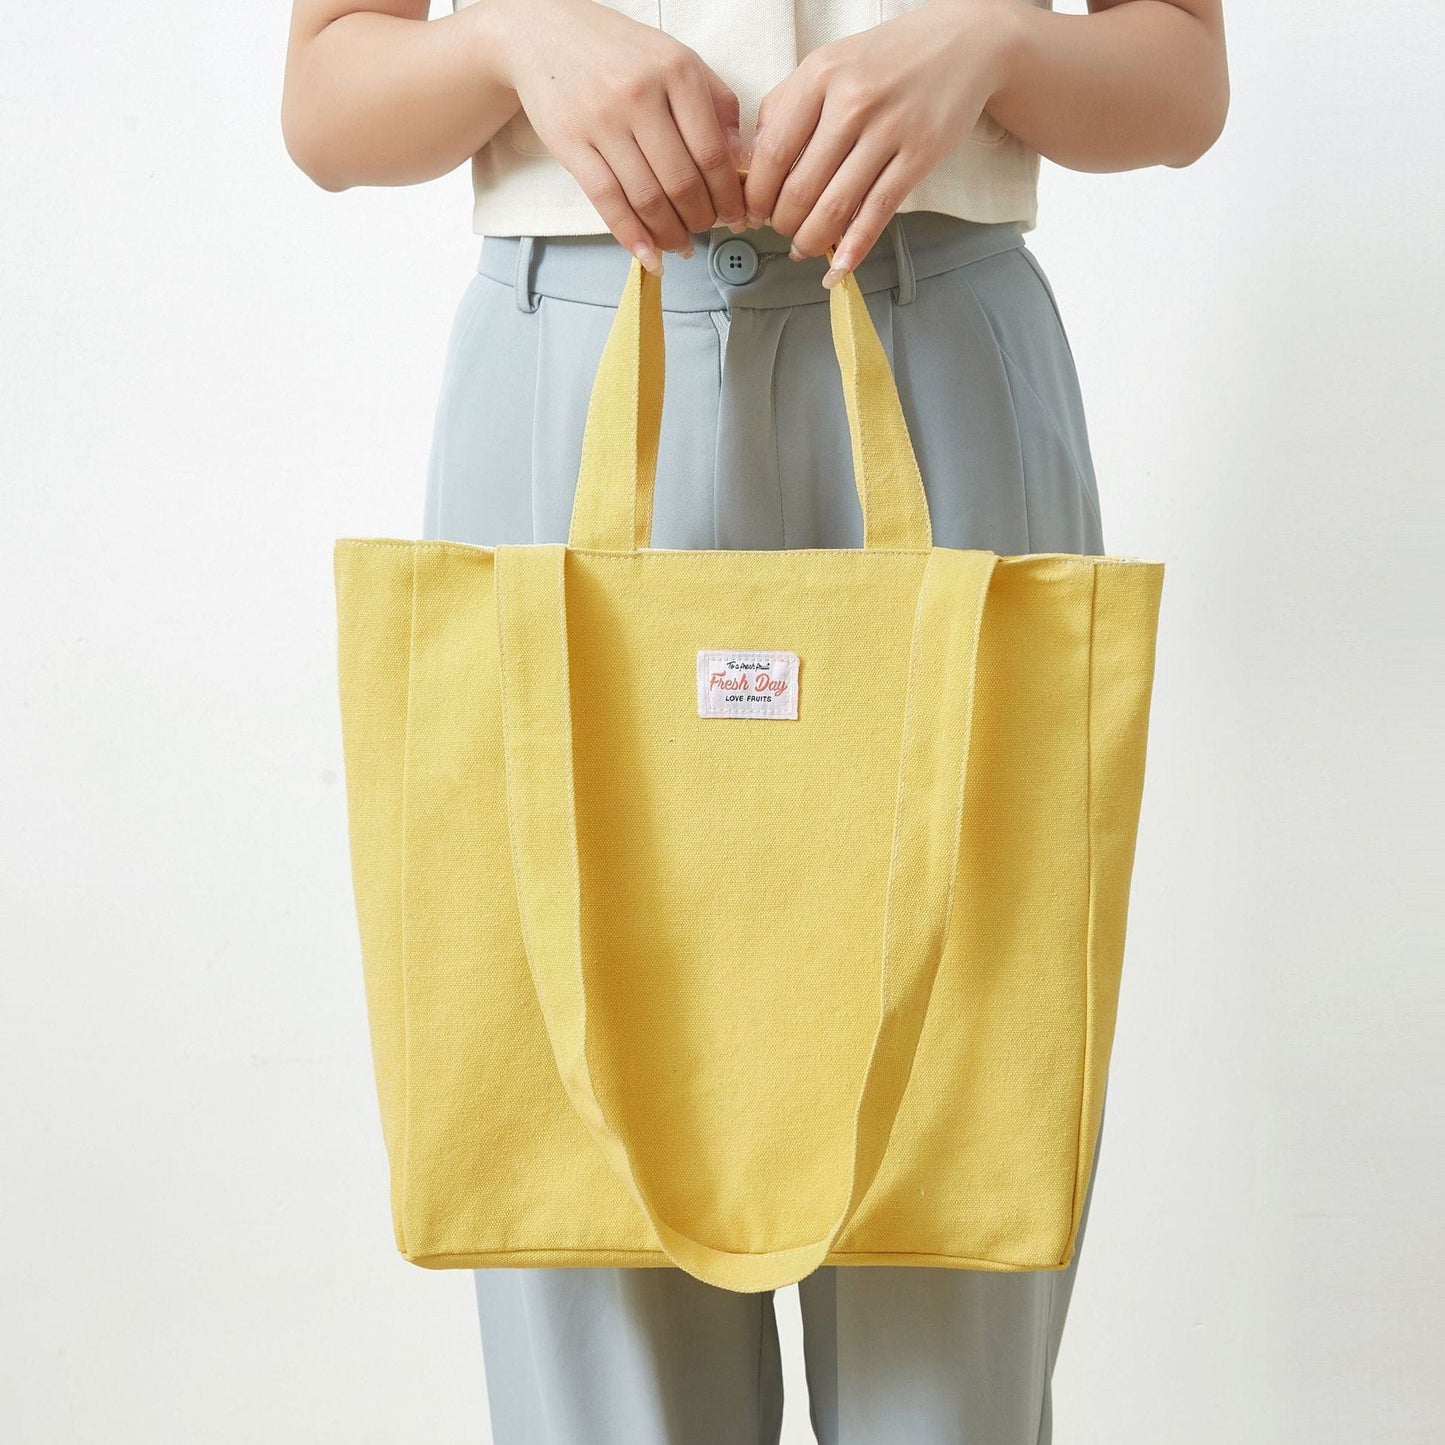 Tote Bag Tote Bag - Double Handle Two-Sided Fruit Canvas Shopping Bags